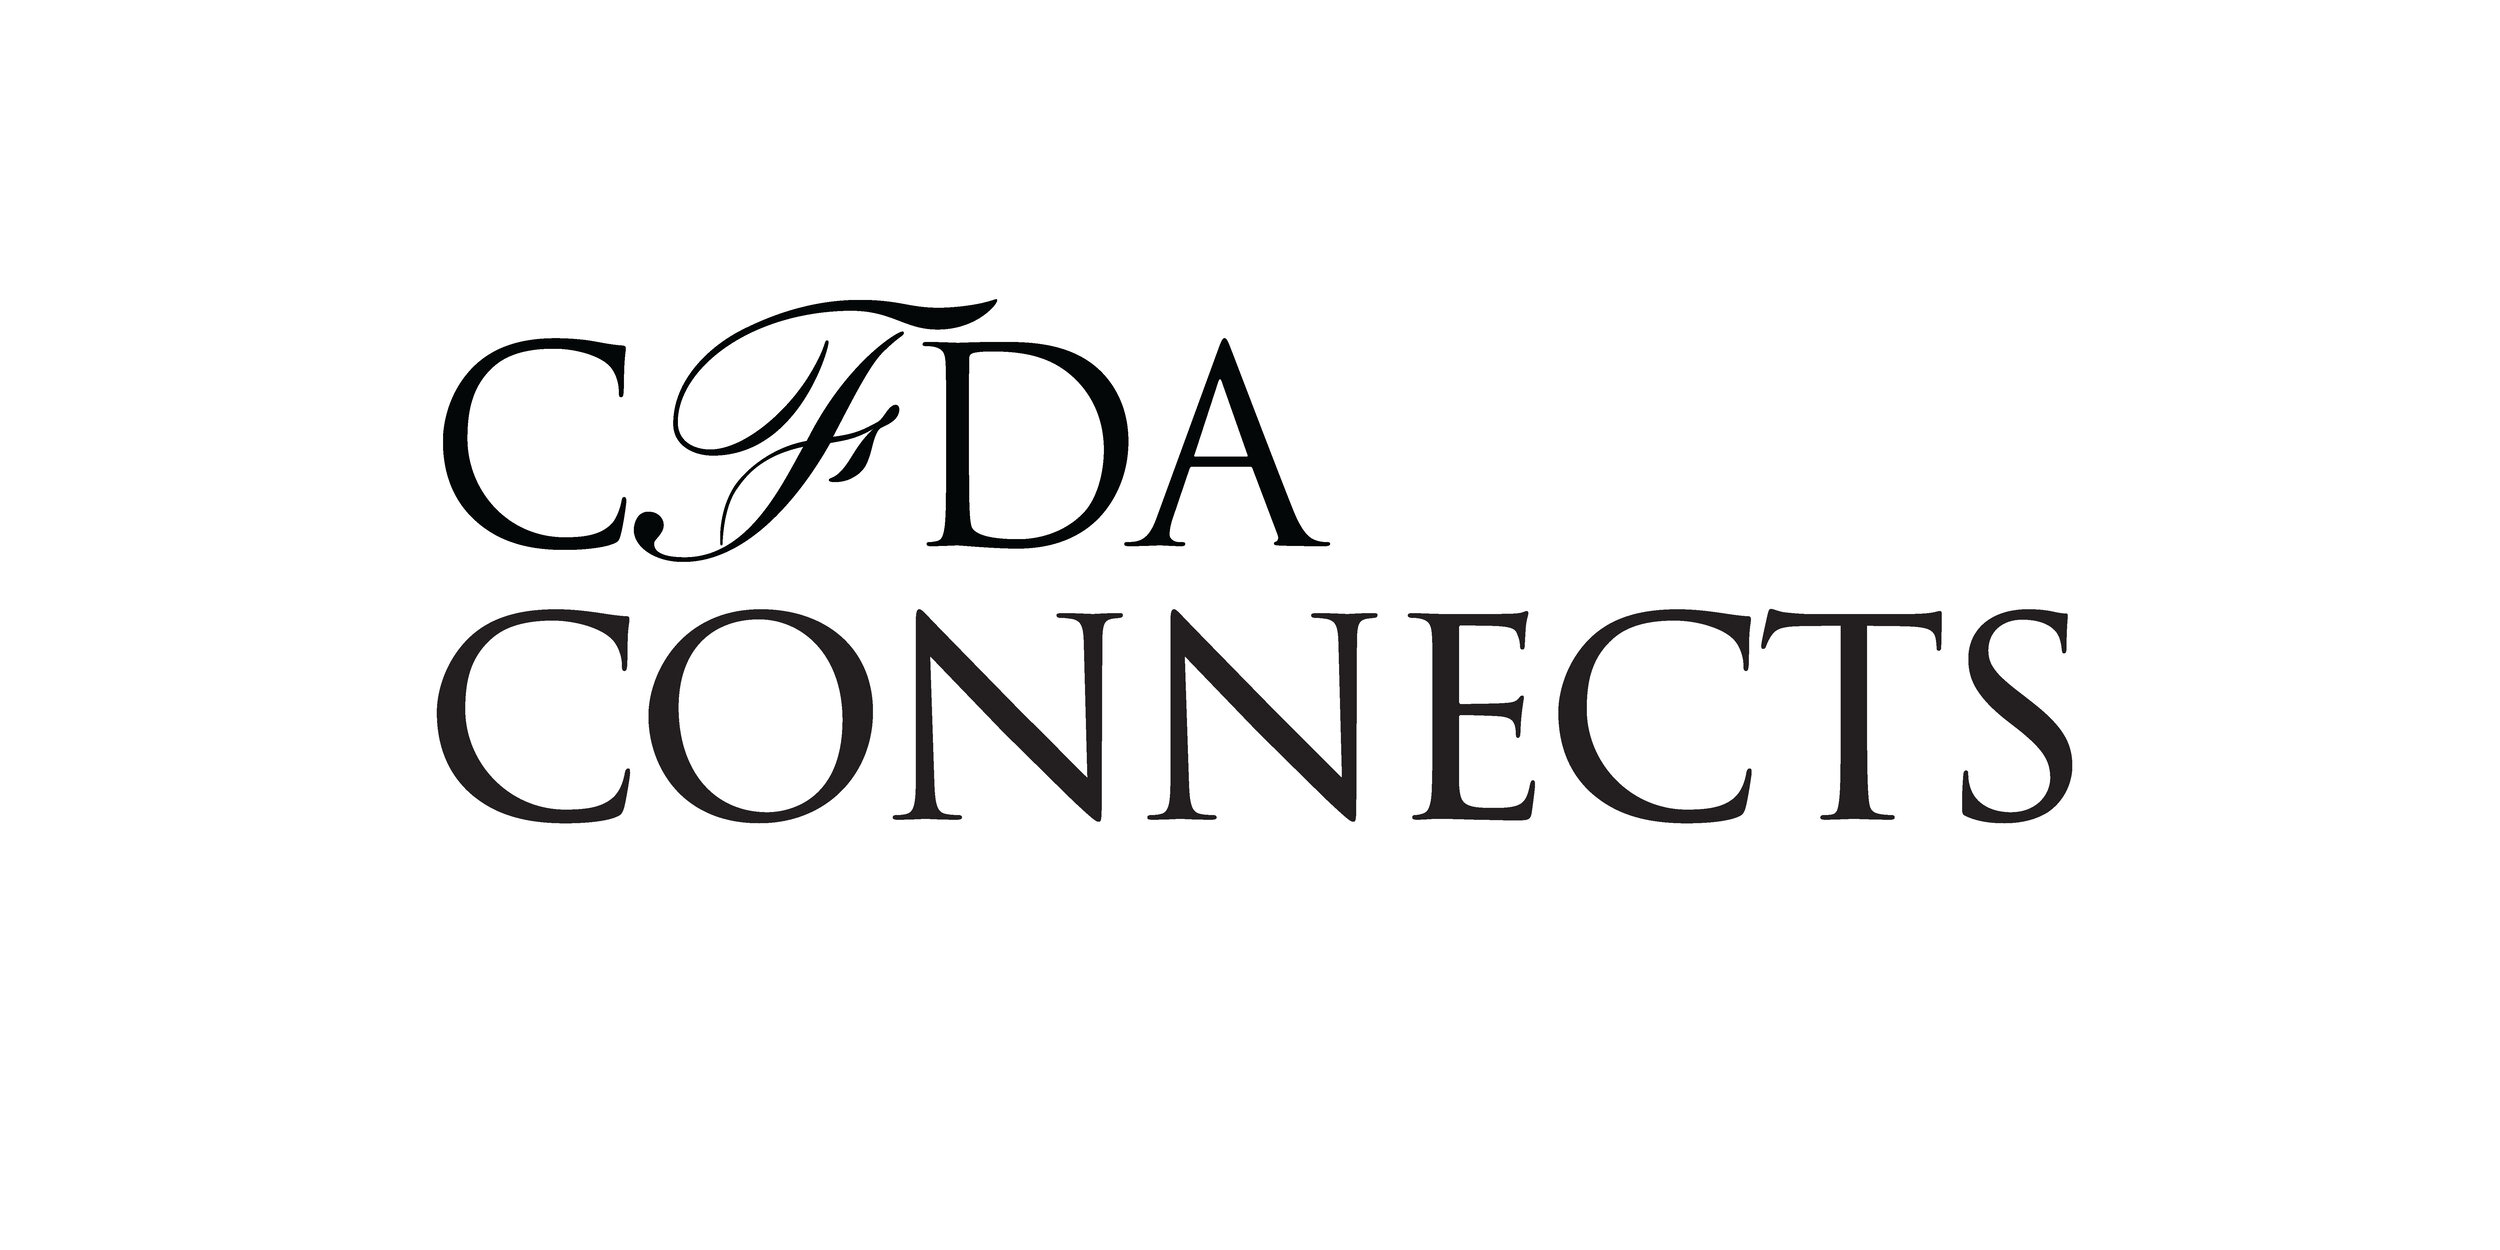 Logo-CFDA-Connects-Stacked.jpg